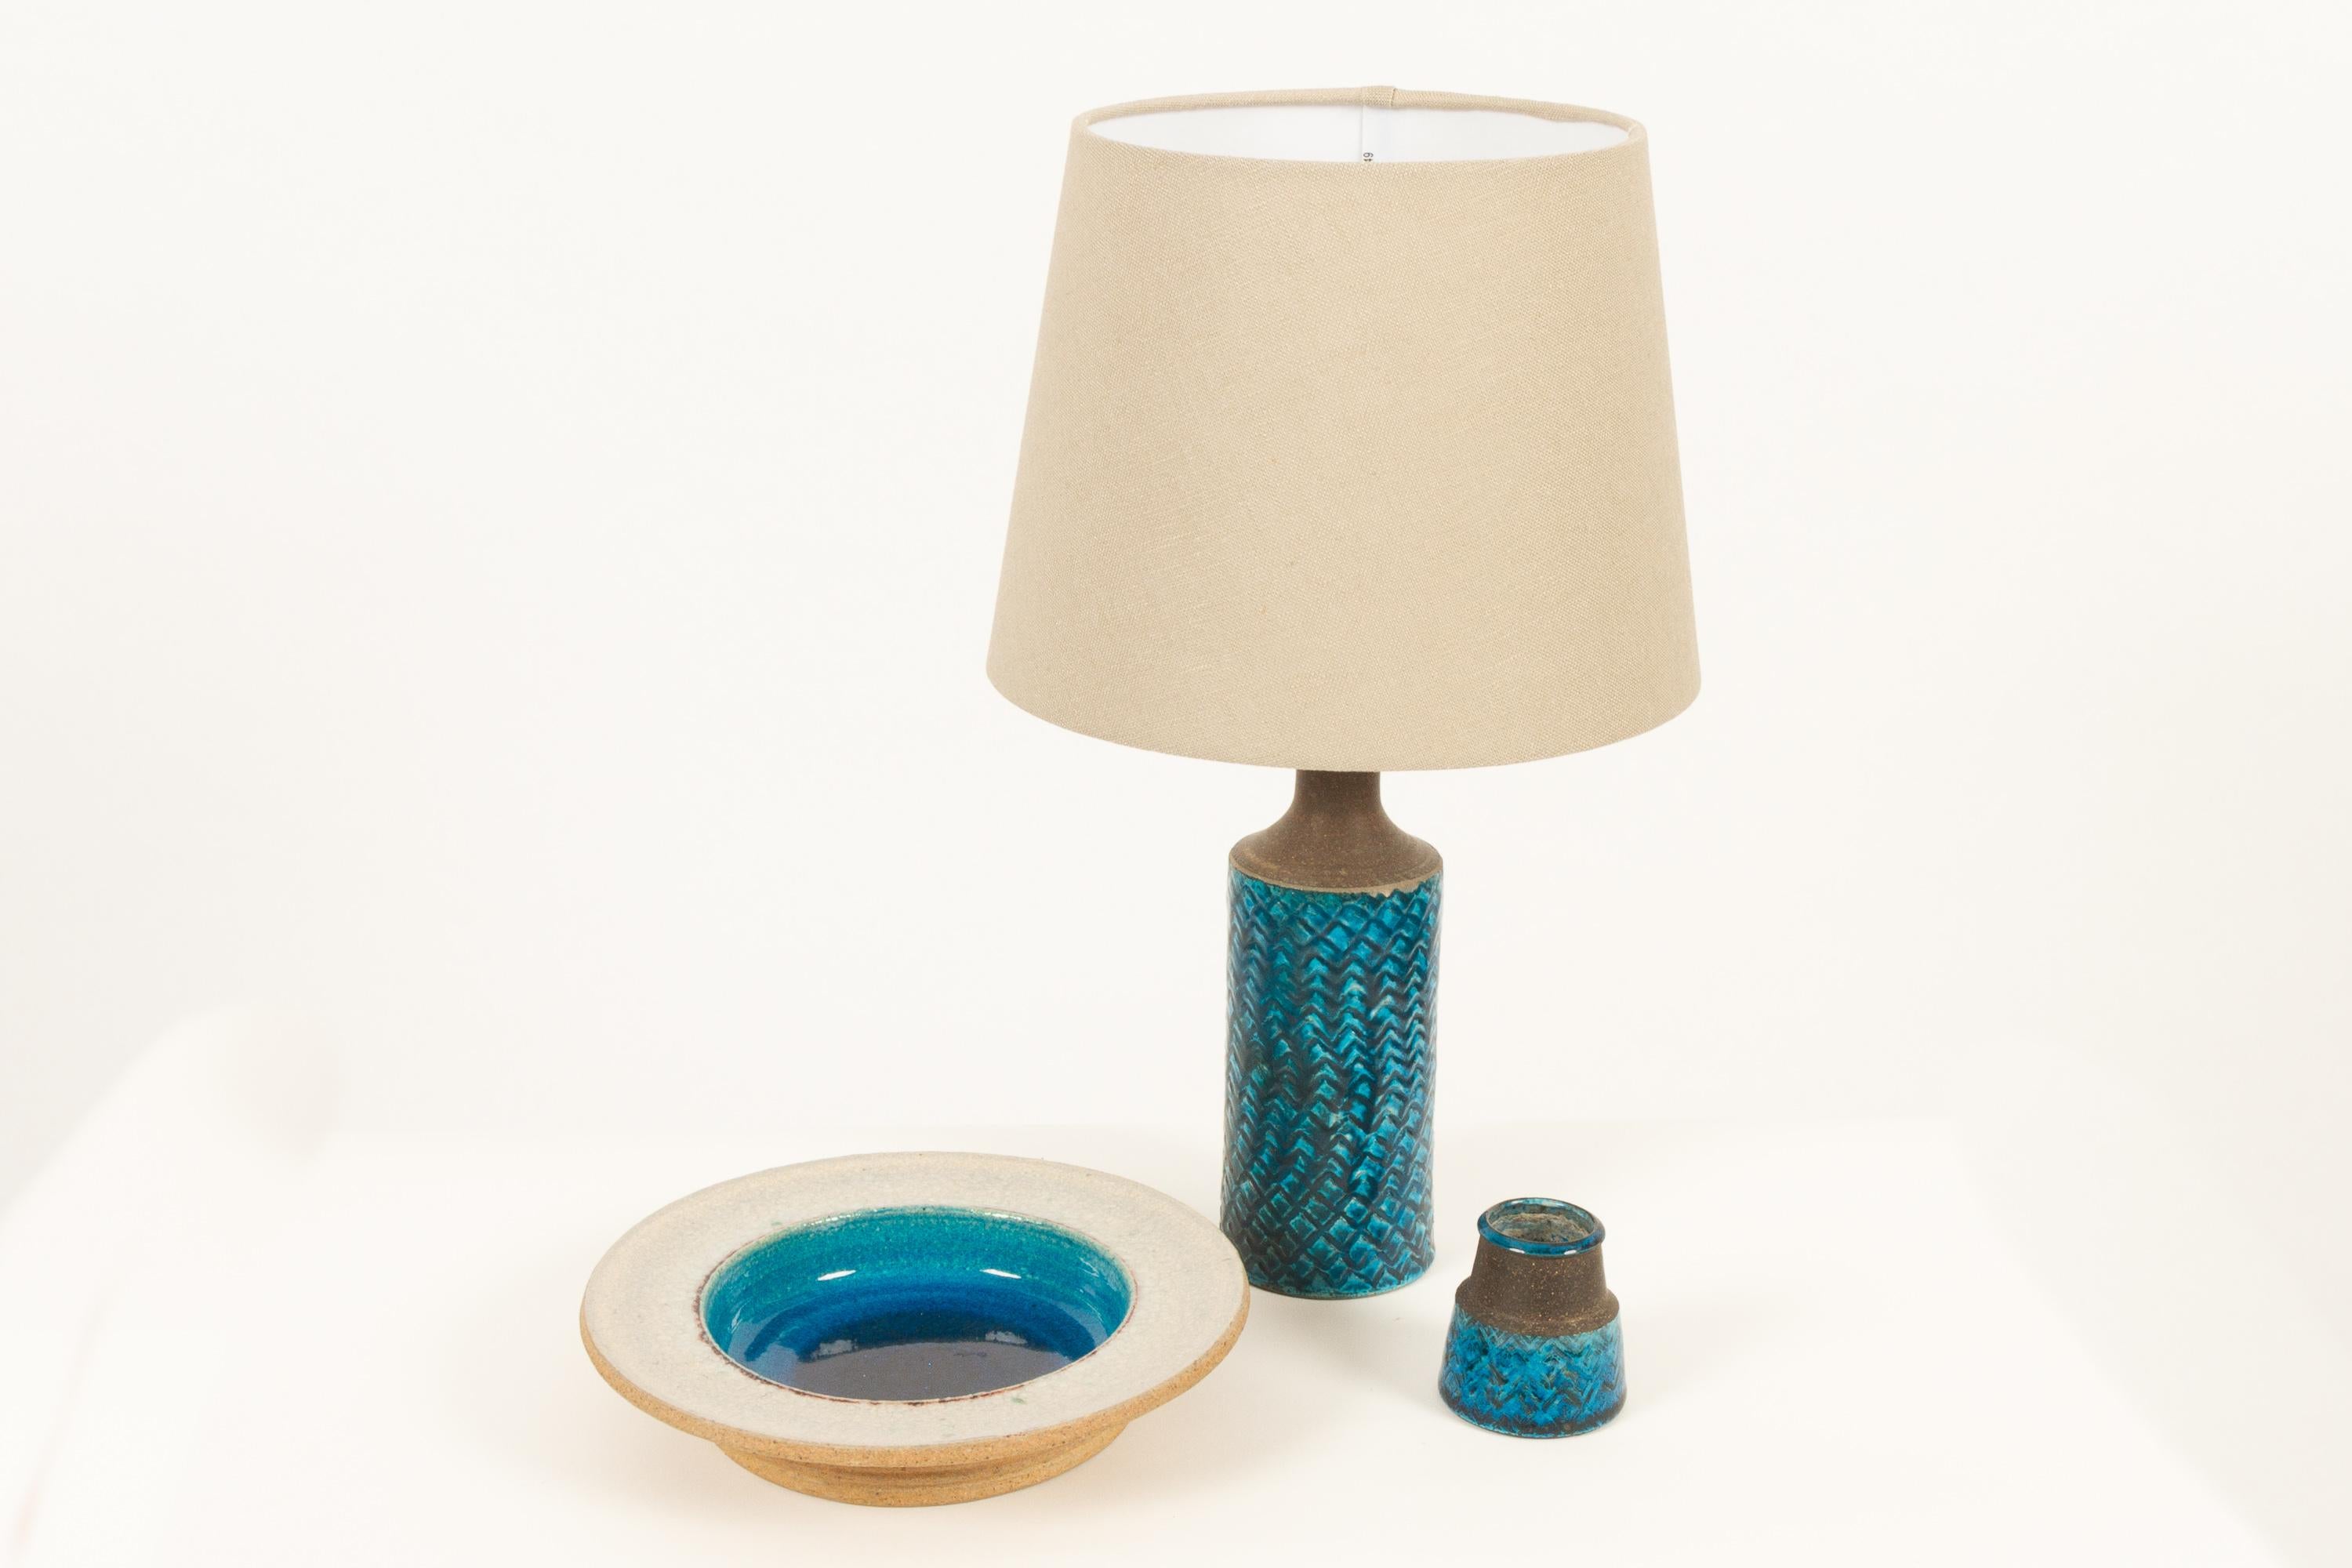 Danish vintage ceramics by Nils Kähler for HAK, 1960s.
Set of beautiful ceramics by Danish ceramist Nils Kähler. Nils was a grandson of Herman August Kähler (HAK). This turquoise blue glaze was often used by and almost synonymous with Nils